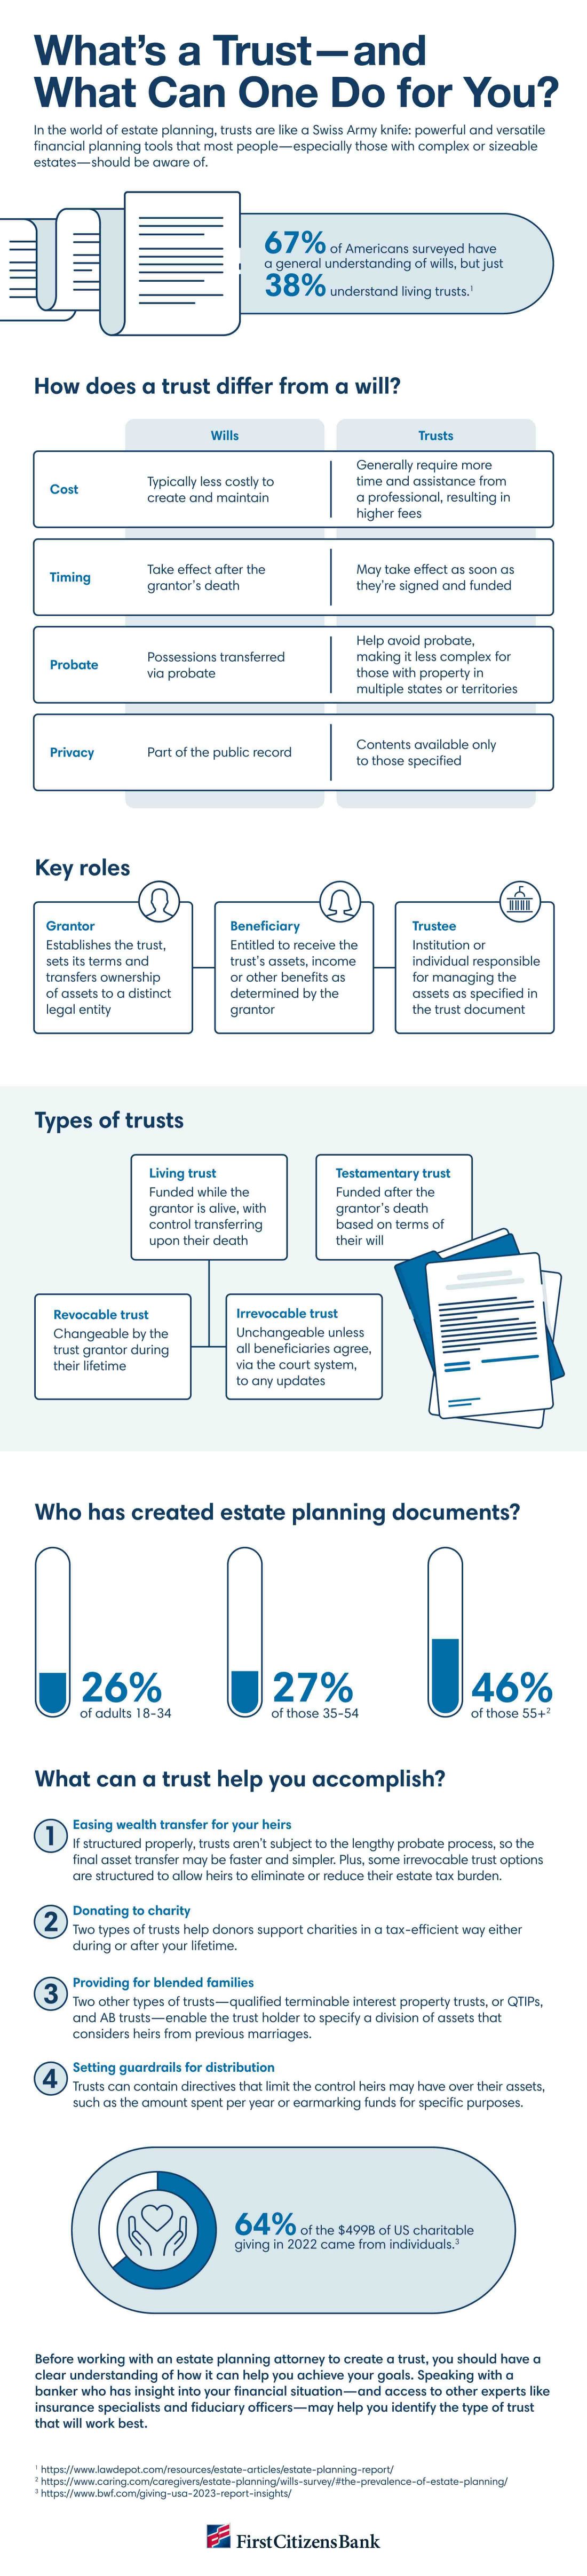 Infographic depicting what trusts are and what they can do for you